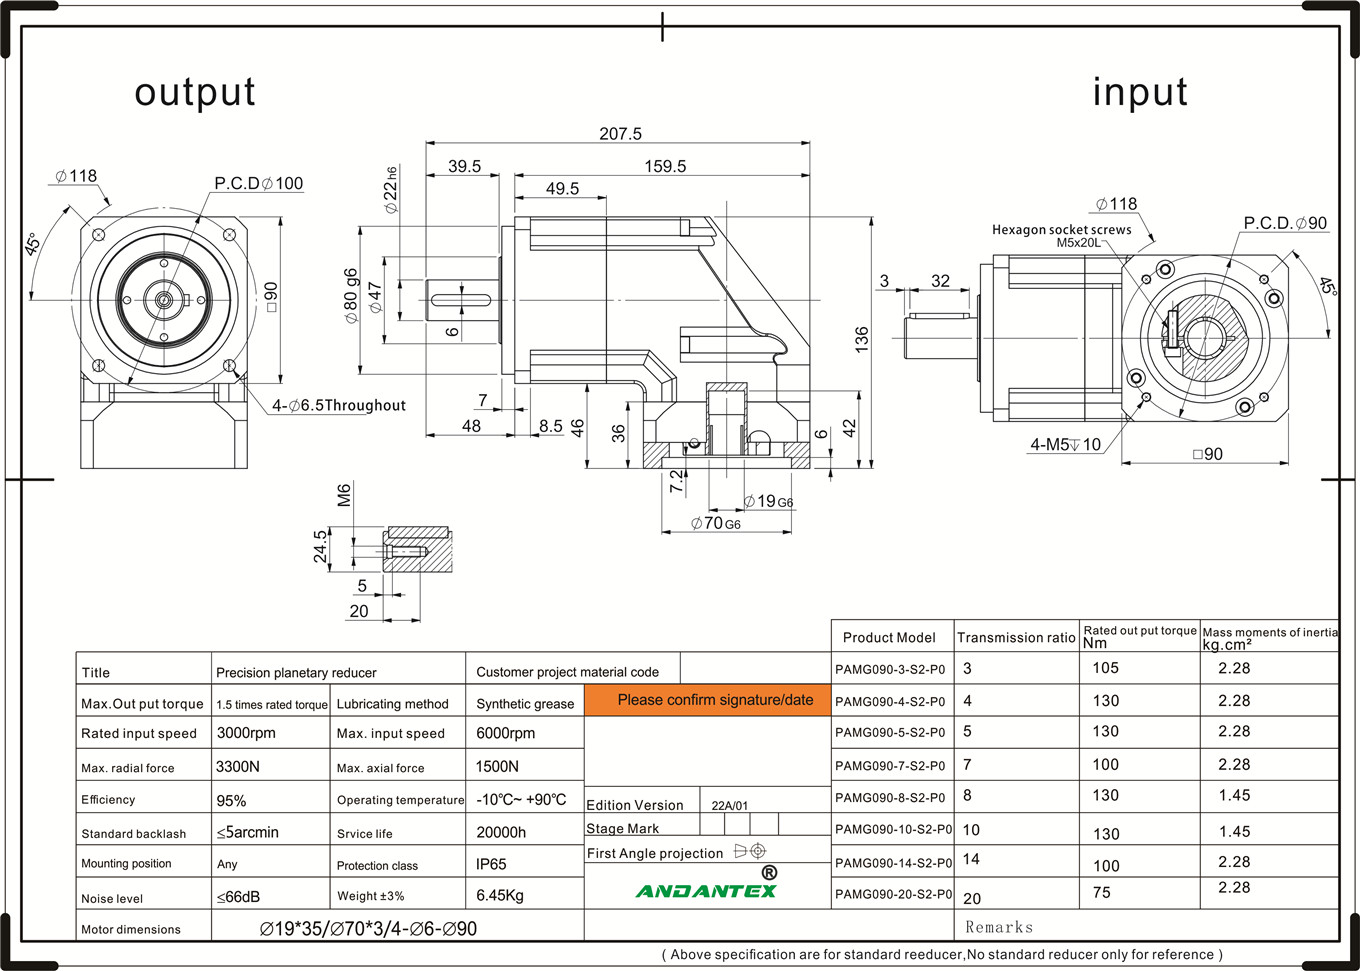 ANDANTEX PAMG090-5-S2-P0 High Precision Series Planetary Gearboxes in Food Processing Production Equipment-01